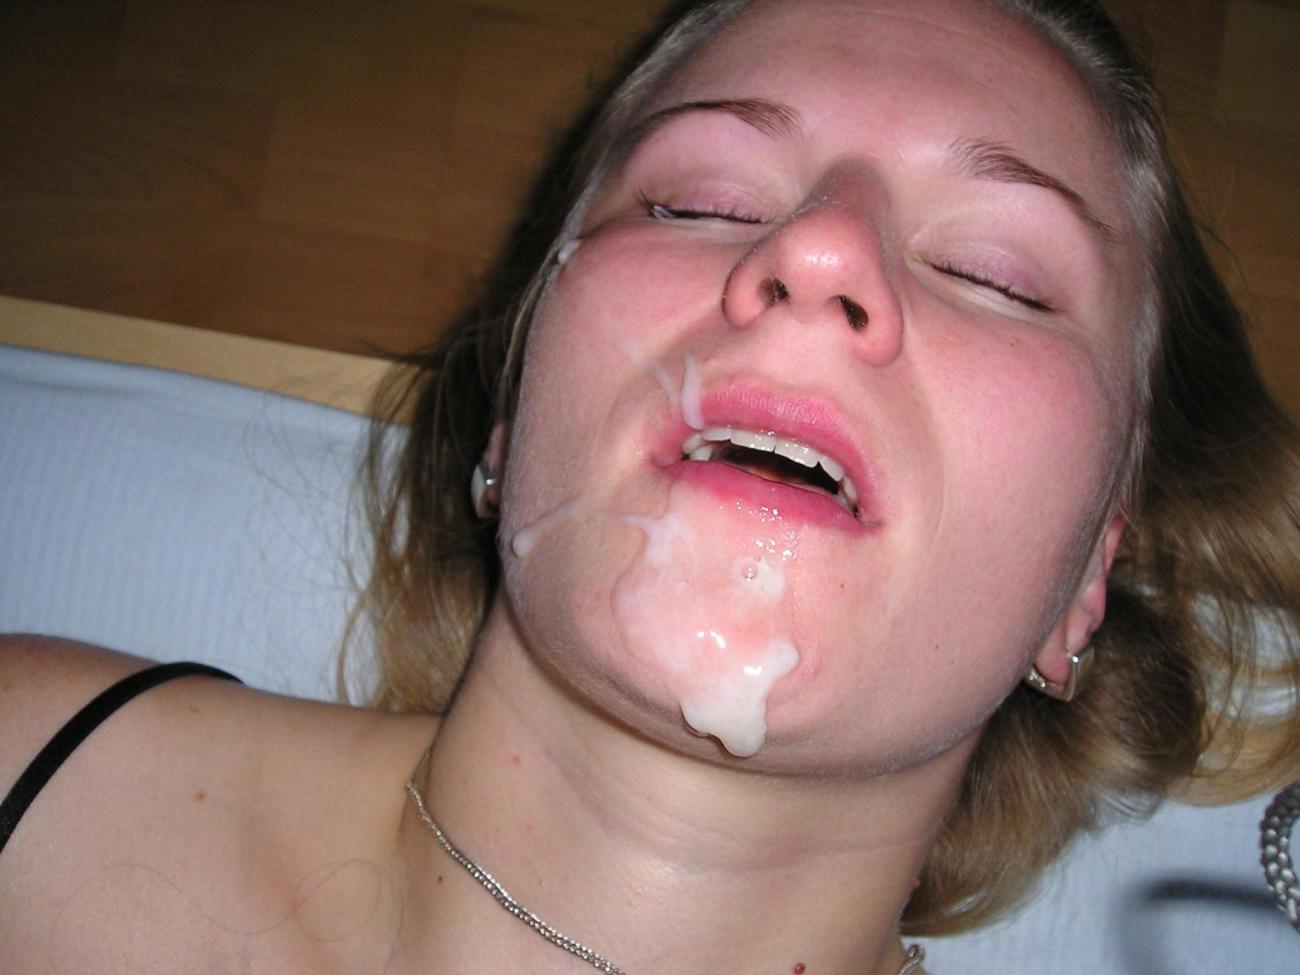 Amateur Facials IV Waiting for your comments upskirtporn